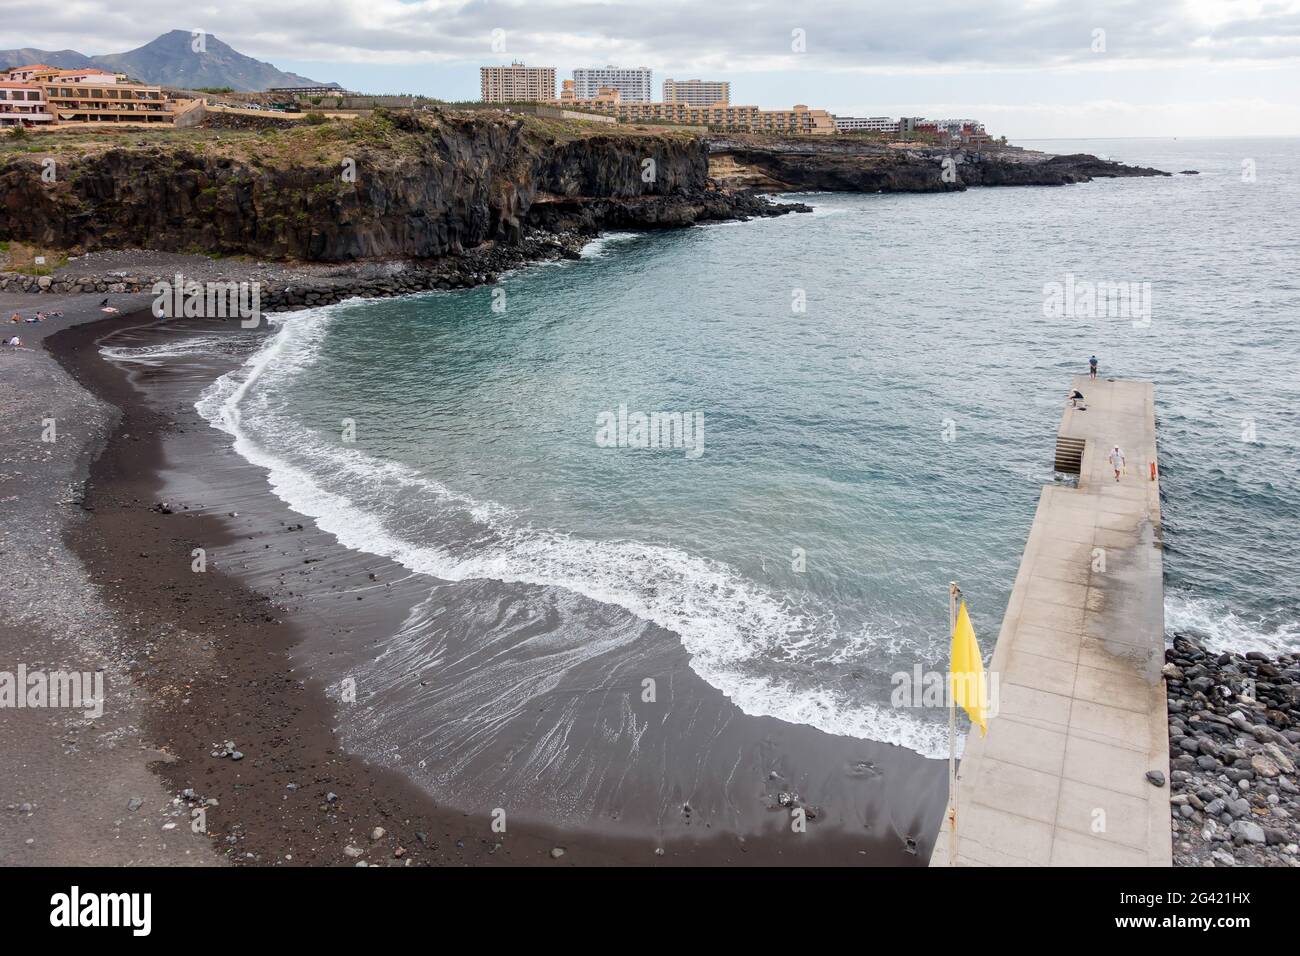 View of the beach at Callao Salveje Tenerife Stock Photo